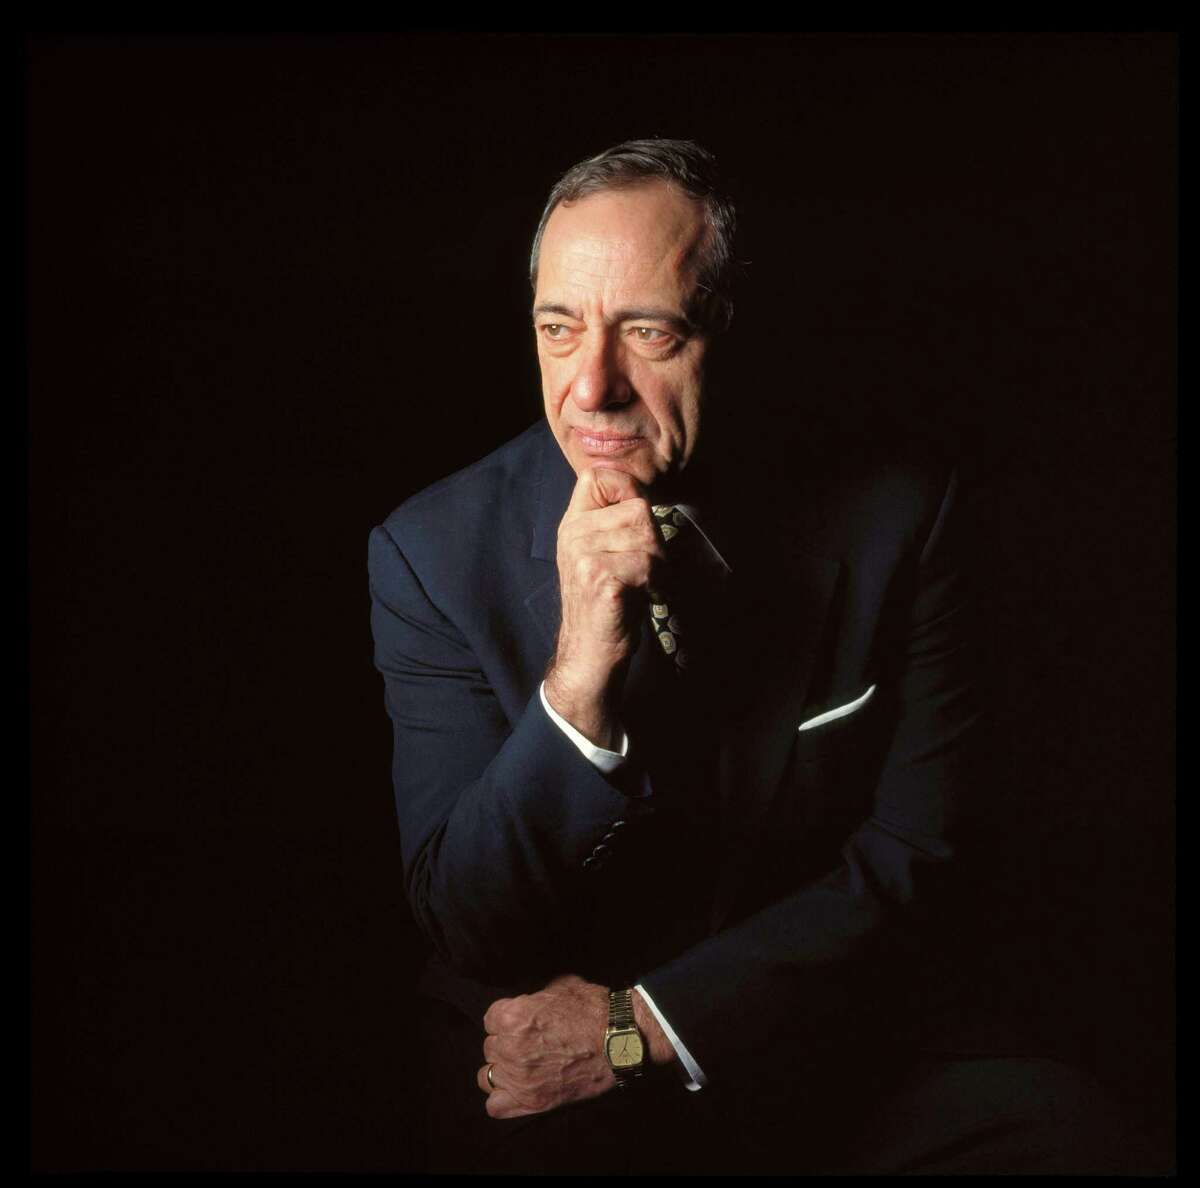 FILE -- Mario Cuomo, the three-term Democratic governor of New York, in 1995. Cuomo, who commanded the attention of the country with a compelling public presence and a forceful defense of liberalism, died at home in Manhattan on Jan. 1, 2015. He was 82. (Fred R. Conrad/The New York Times) ORG XMIT: XNYT132